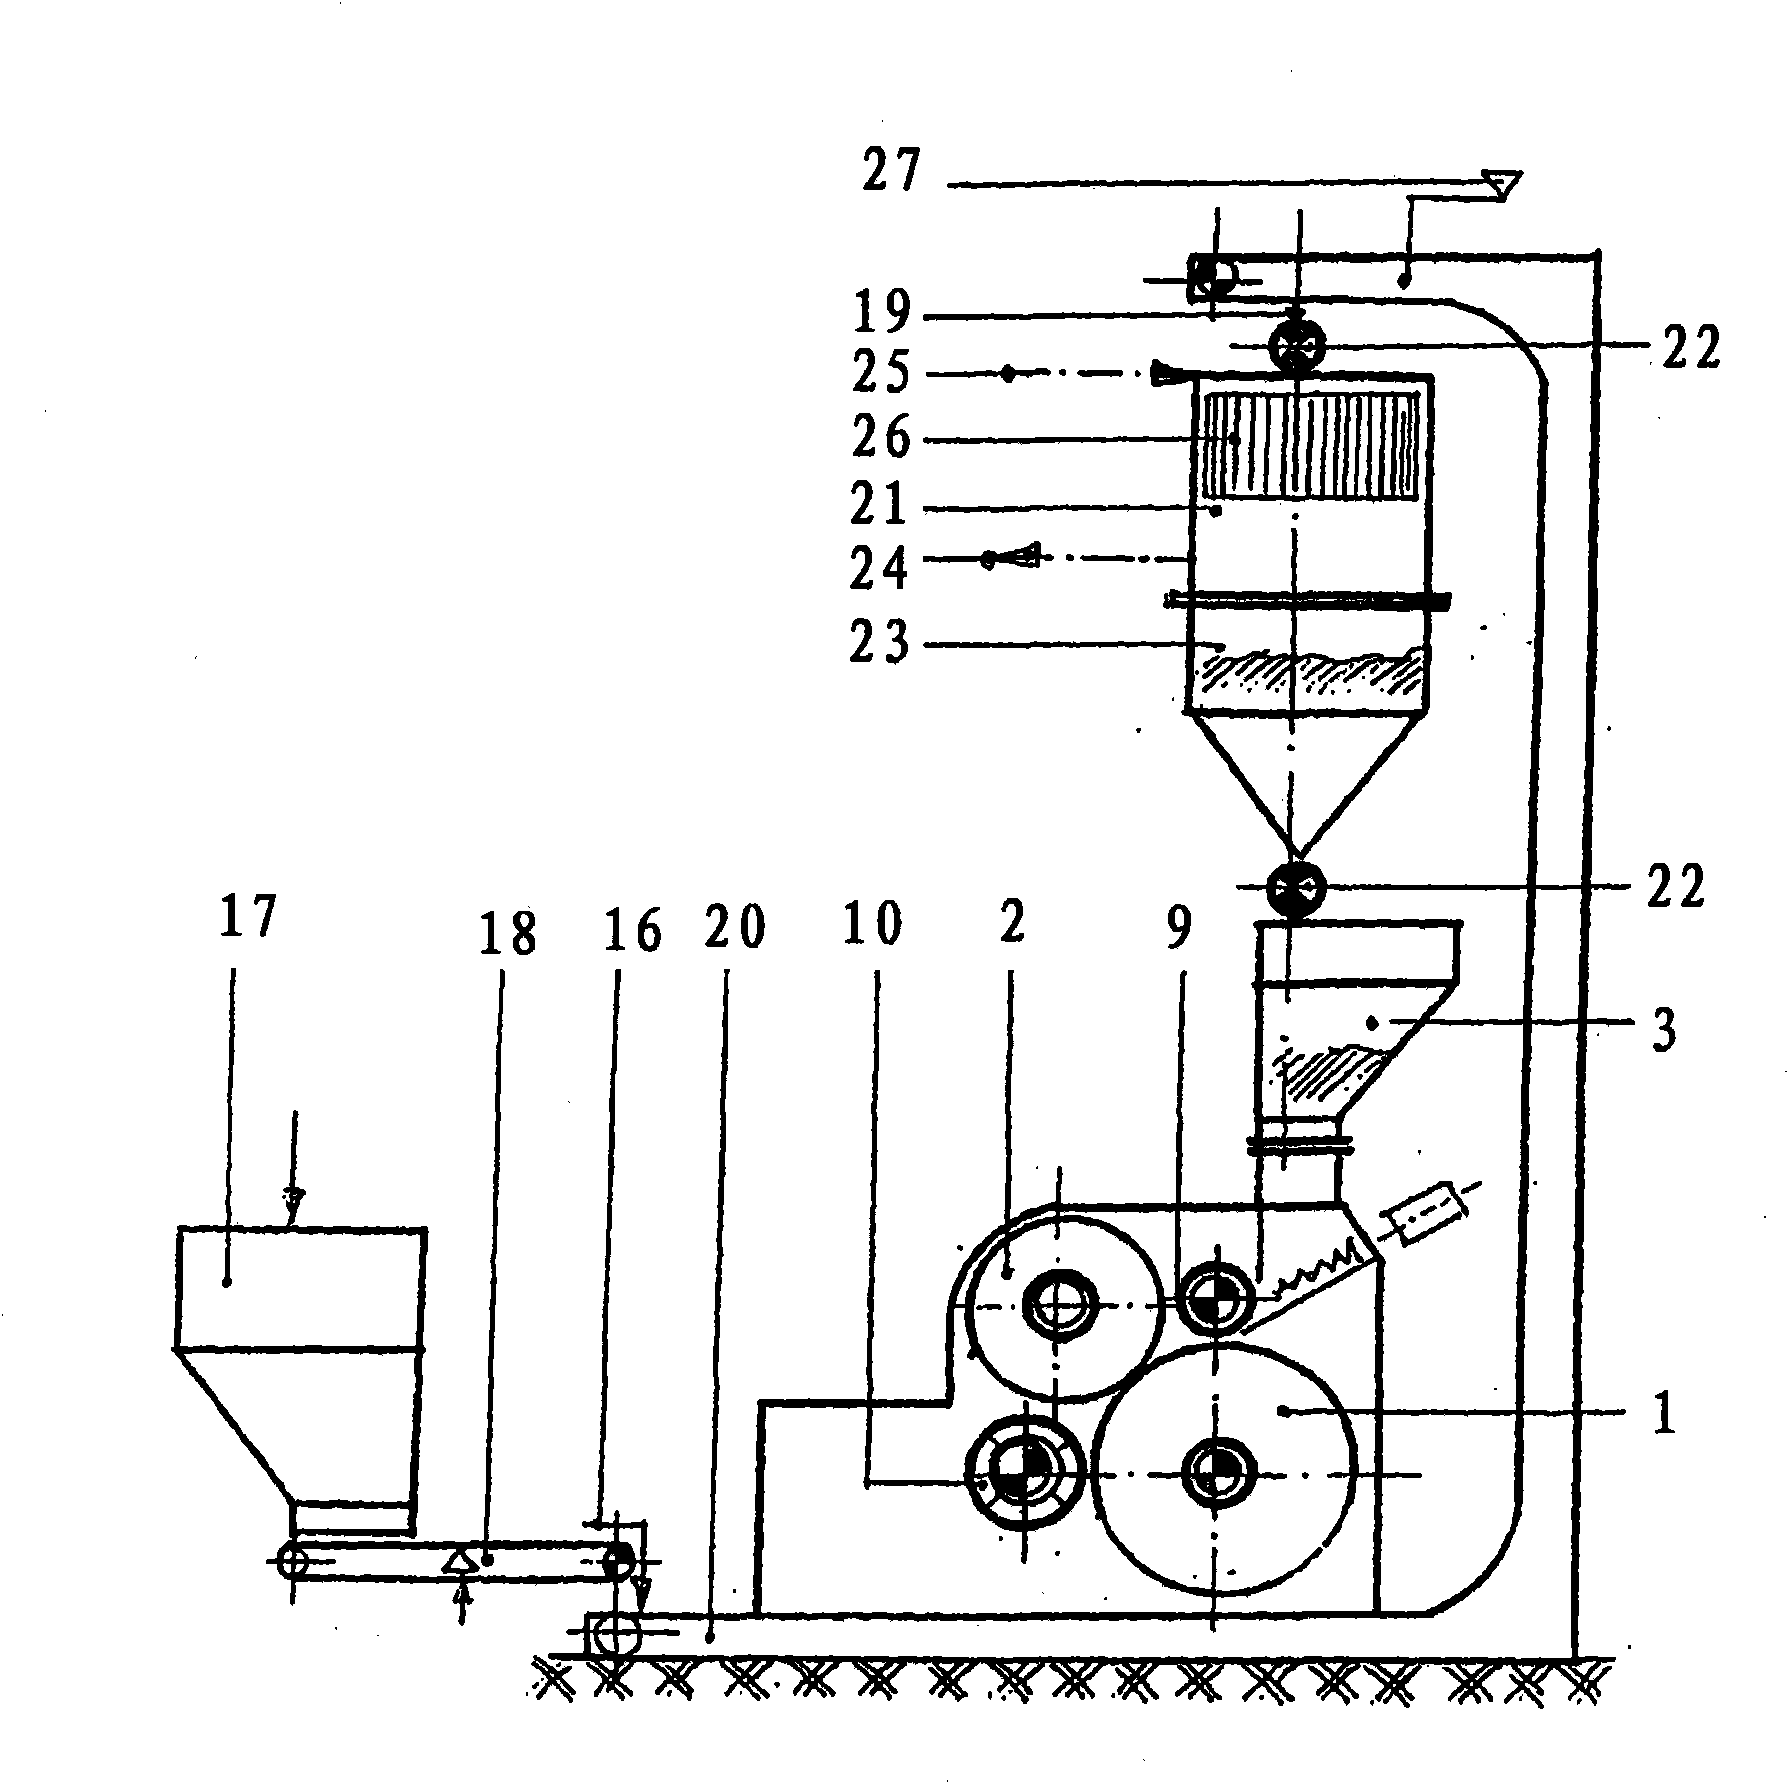 Method of, and apparatus for, the preliminary grinding and finishing of mineral and non-mineral materials